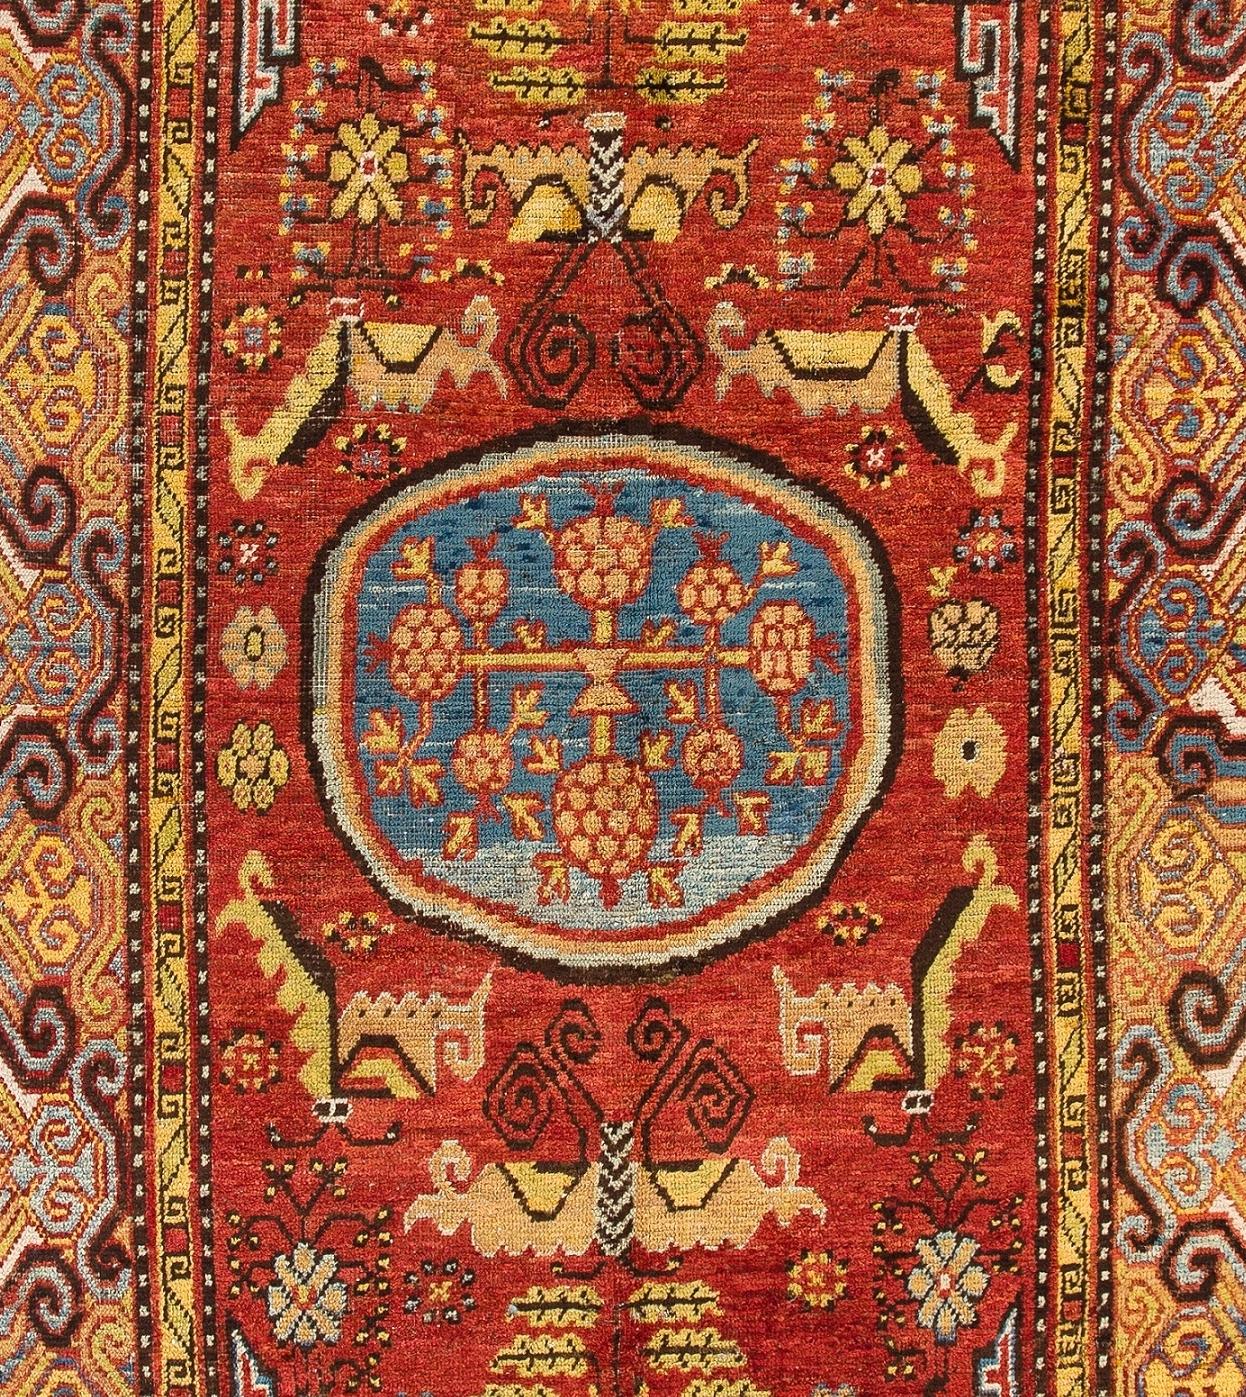 An outstanding antique Khotan rug from East Turkestan/ Western China. This is one of the best and oldest examples of woven work of art from this ancient weaving center. Well preserved condition. 
Size: 5.6 x 10.3 ft.